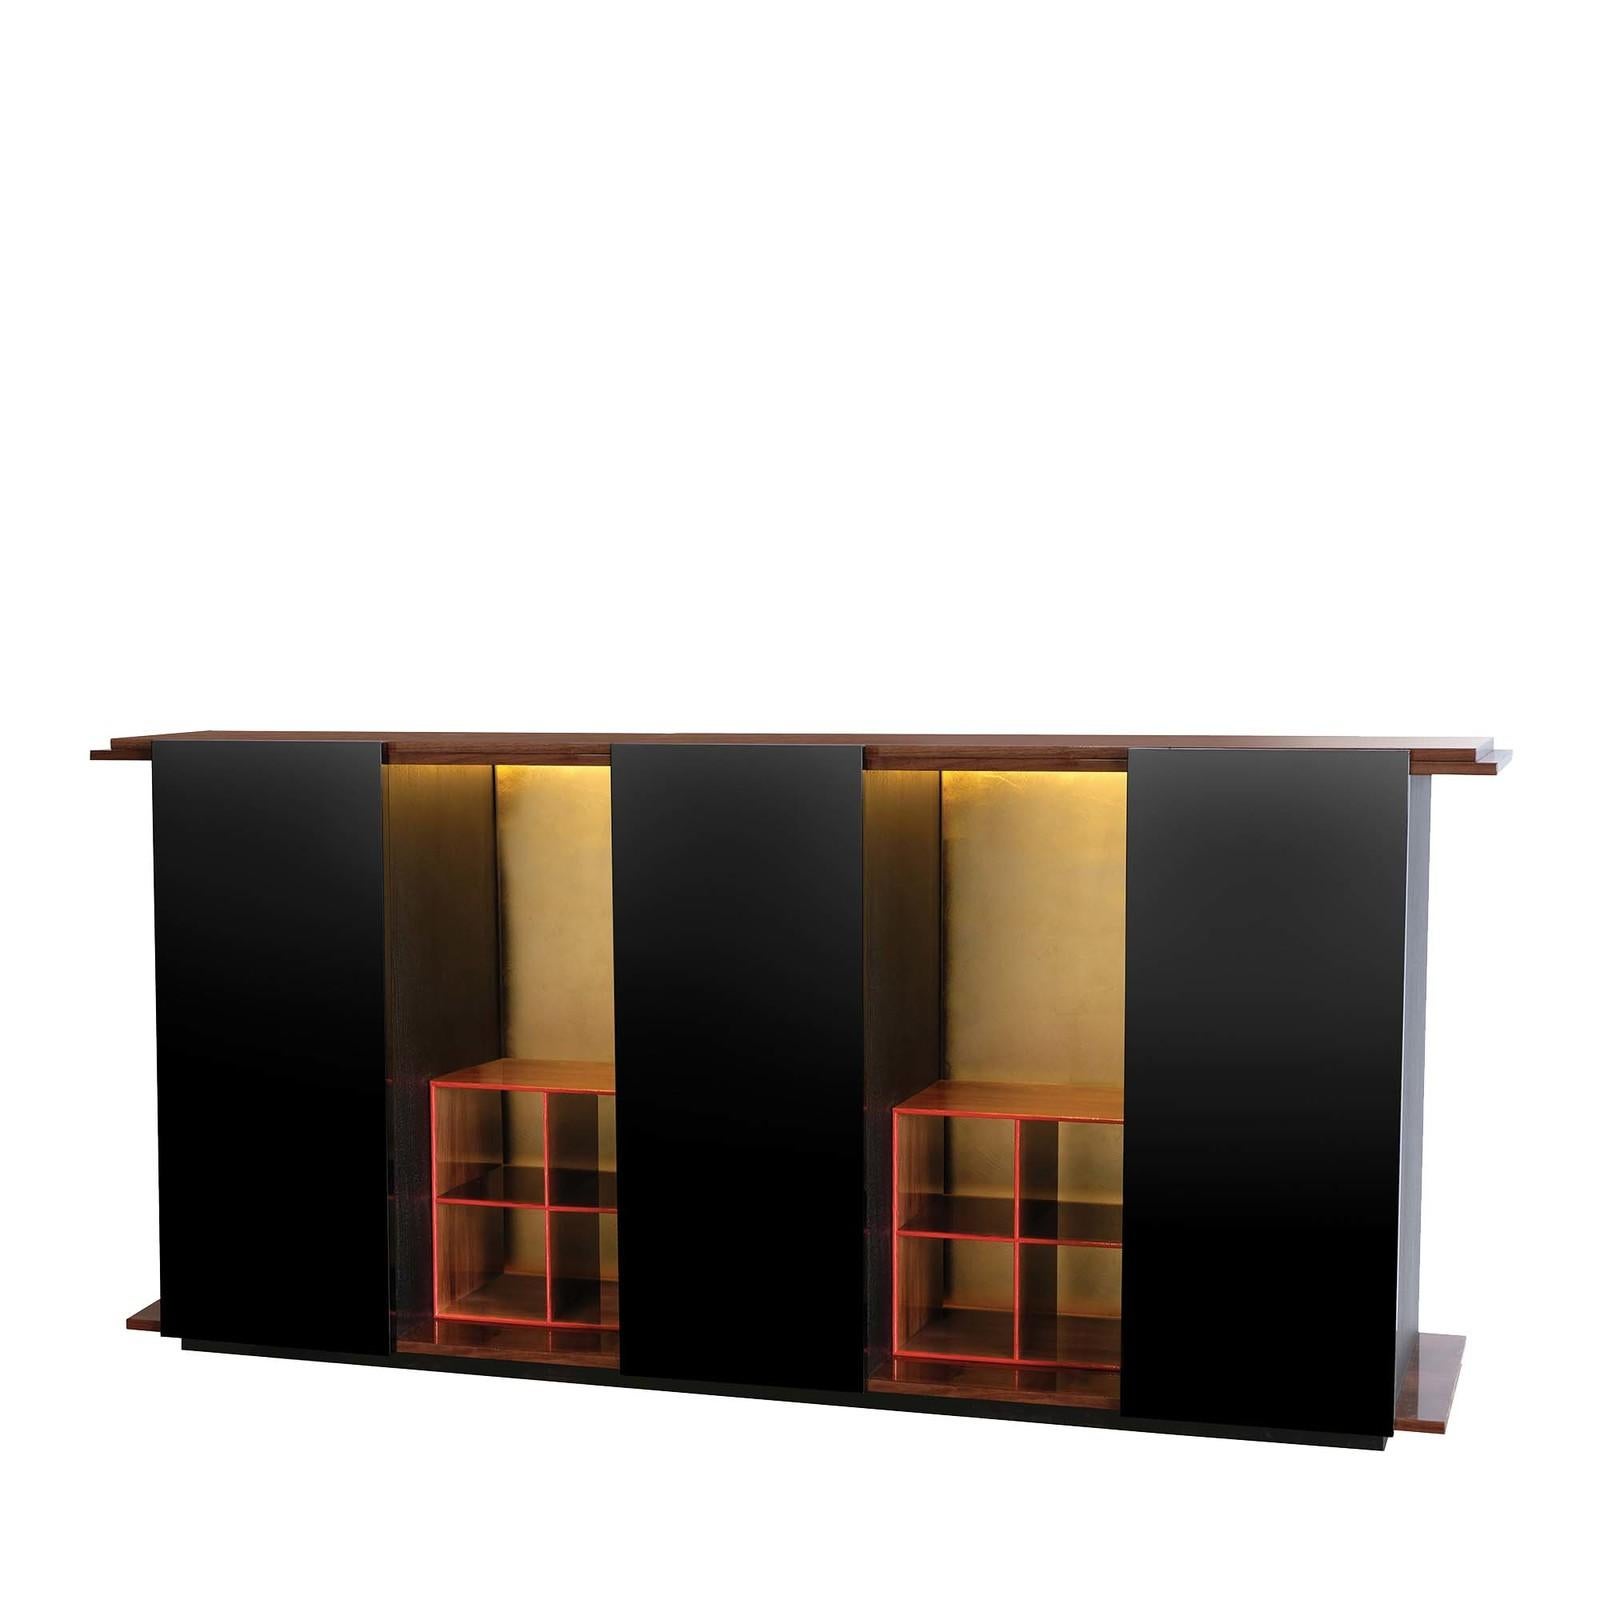 Defined by an intriguing combination of open and closed spaces, this cabinet's distinctive character embodies a precise harmony of contrasts. Framed in a top and base in Canaletto walnut, the three cabinets with glossy black polyurethane lacquer are